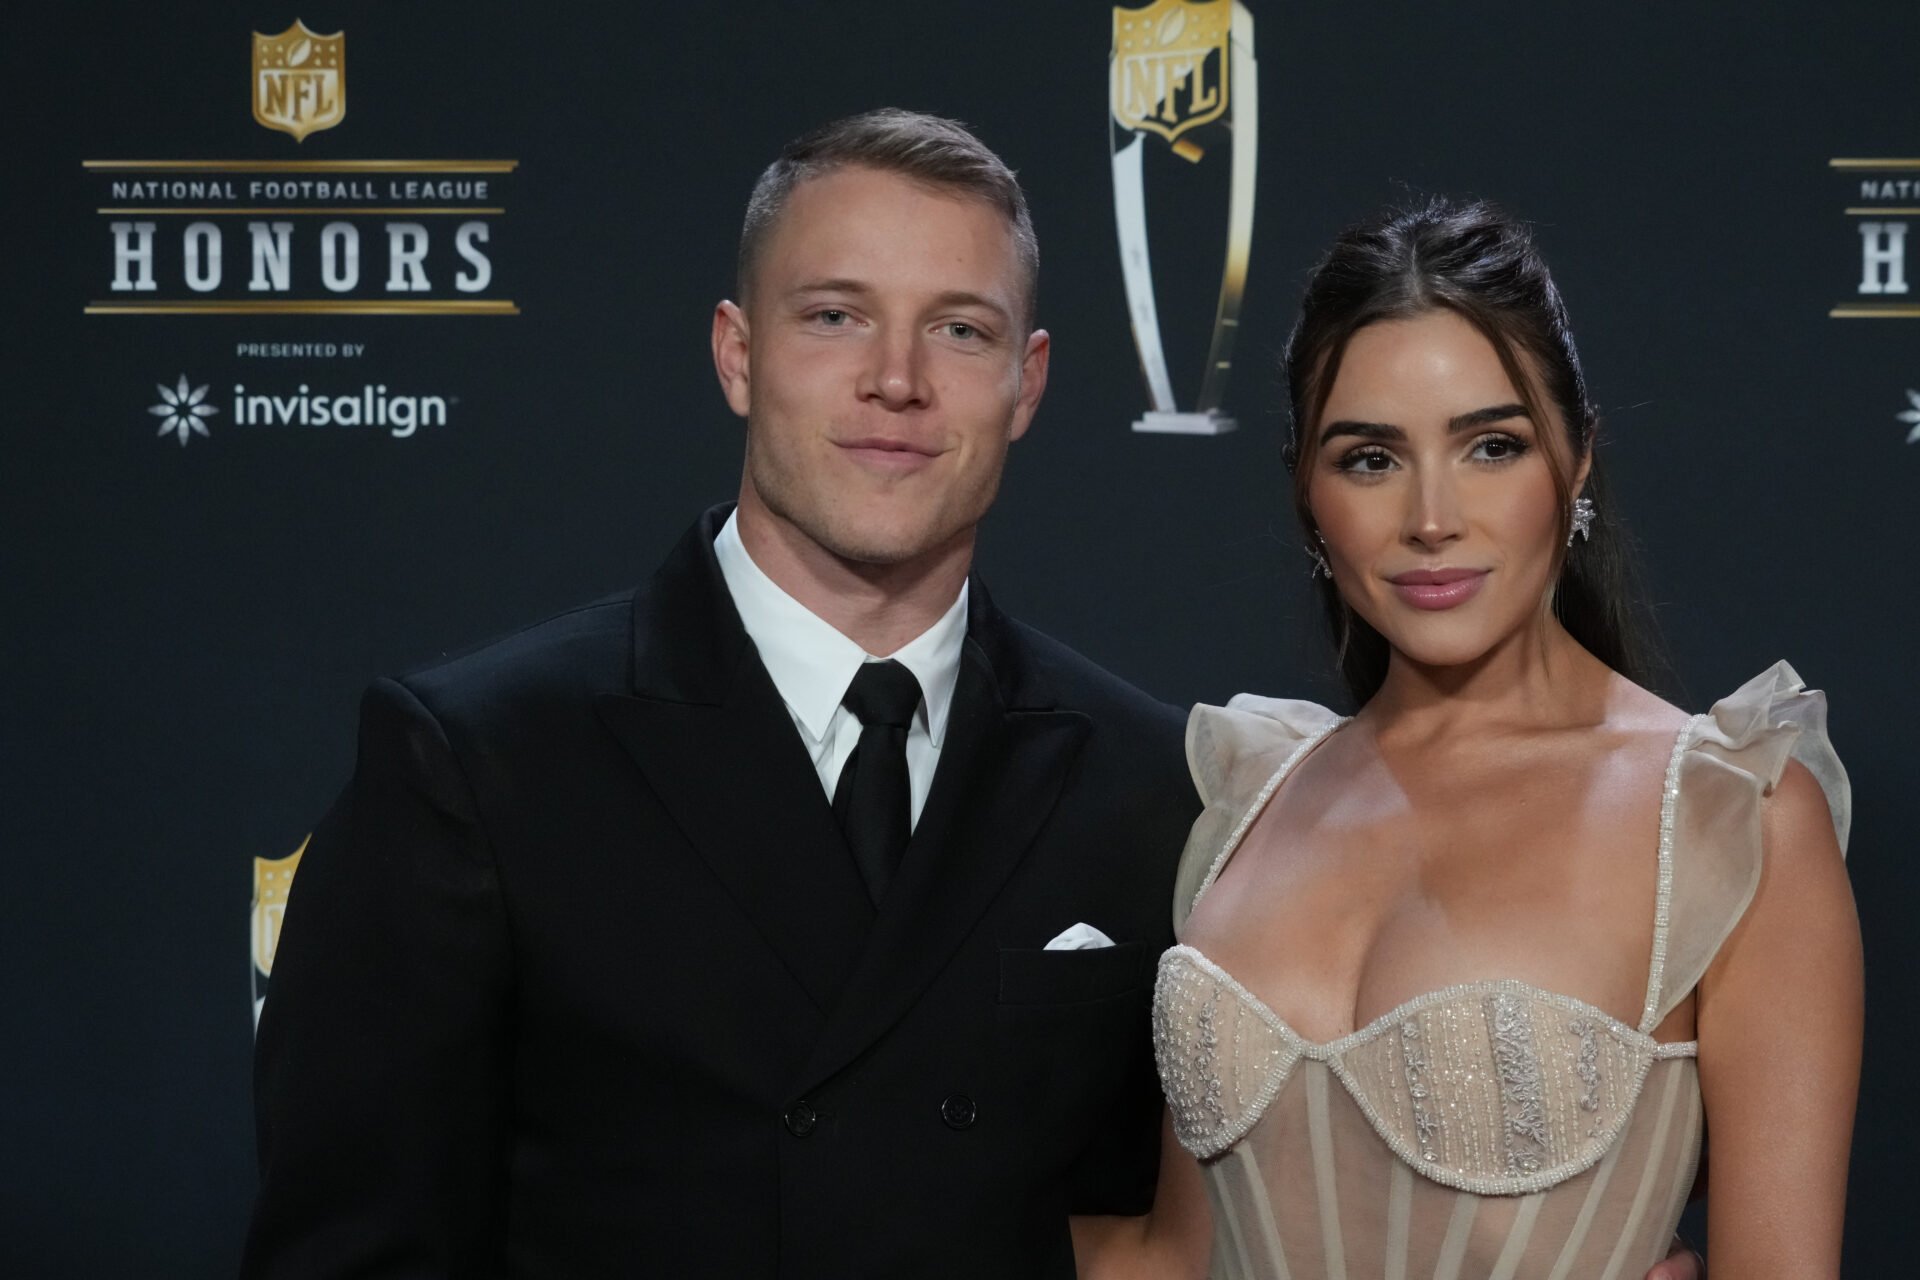 San Fancisco 49ers running back Christian McCaffrey poses for a photo on the red carpet before the NFL Honors award show at Symphony Hall